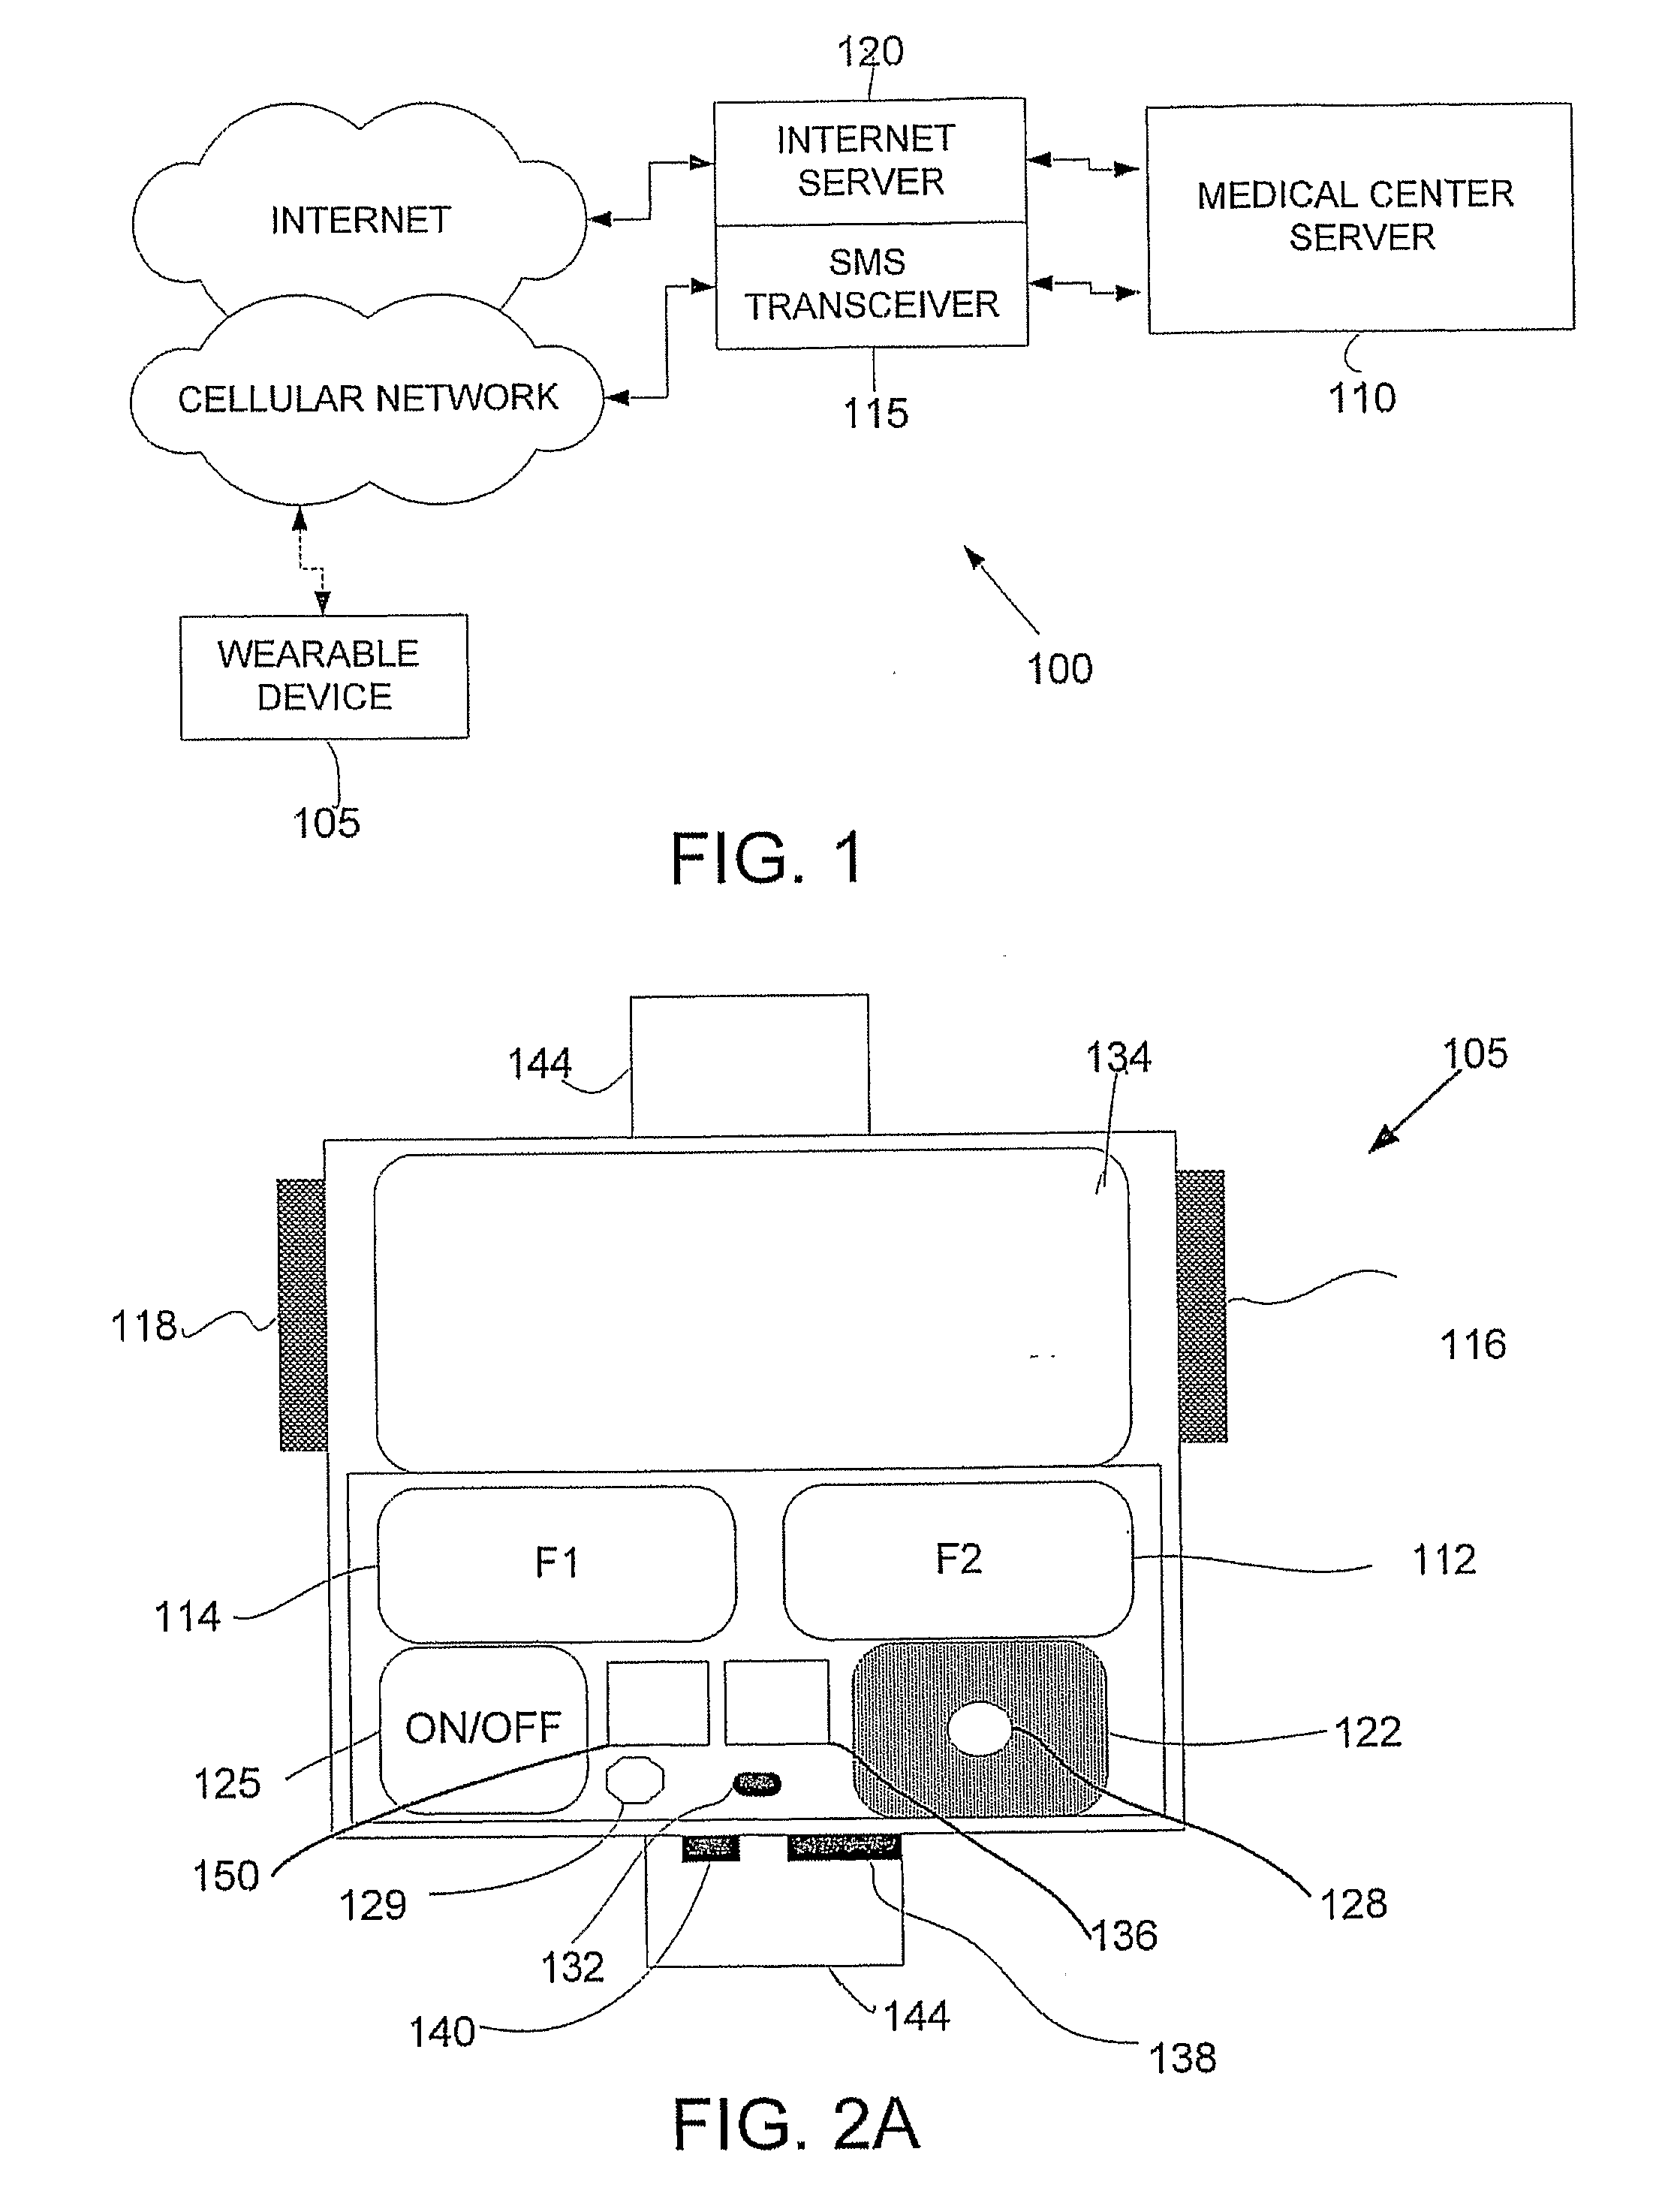 Wearable Device, System and Method for Measuring a Pulse While a User is in Motion